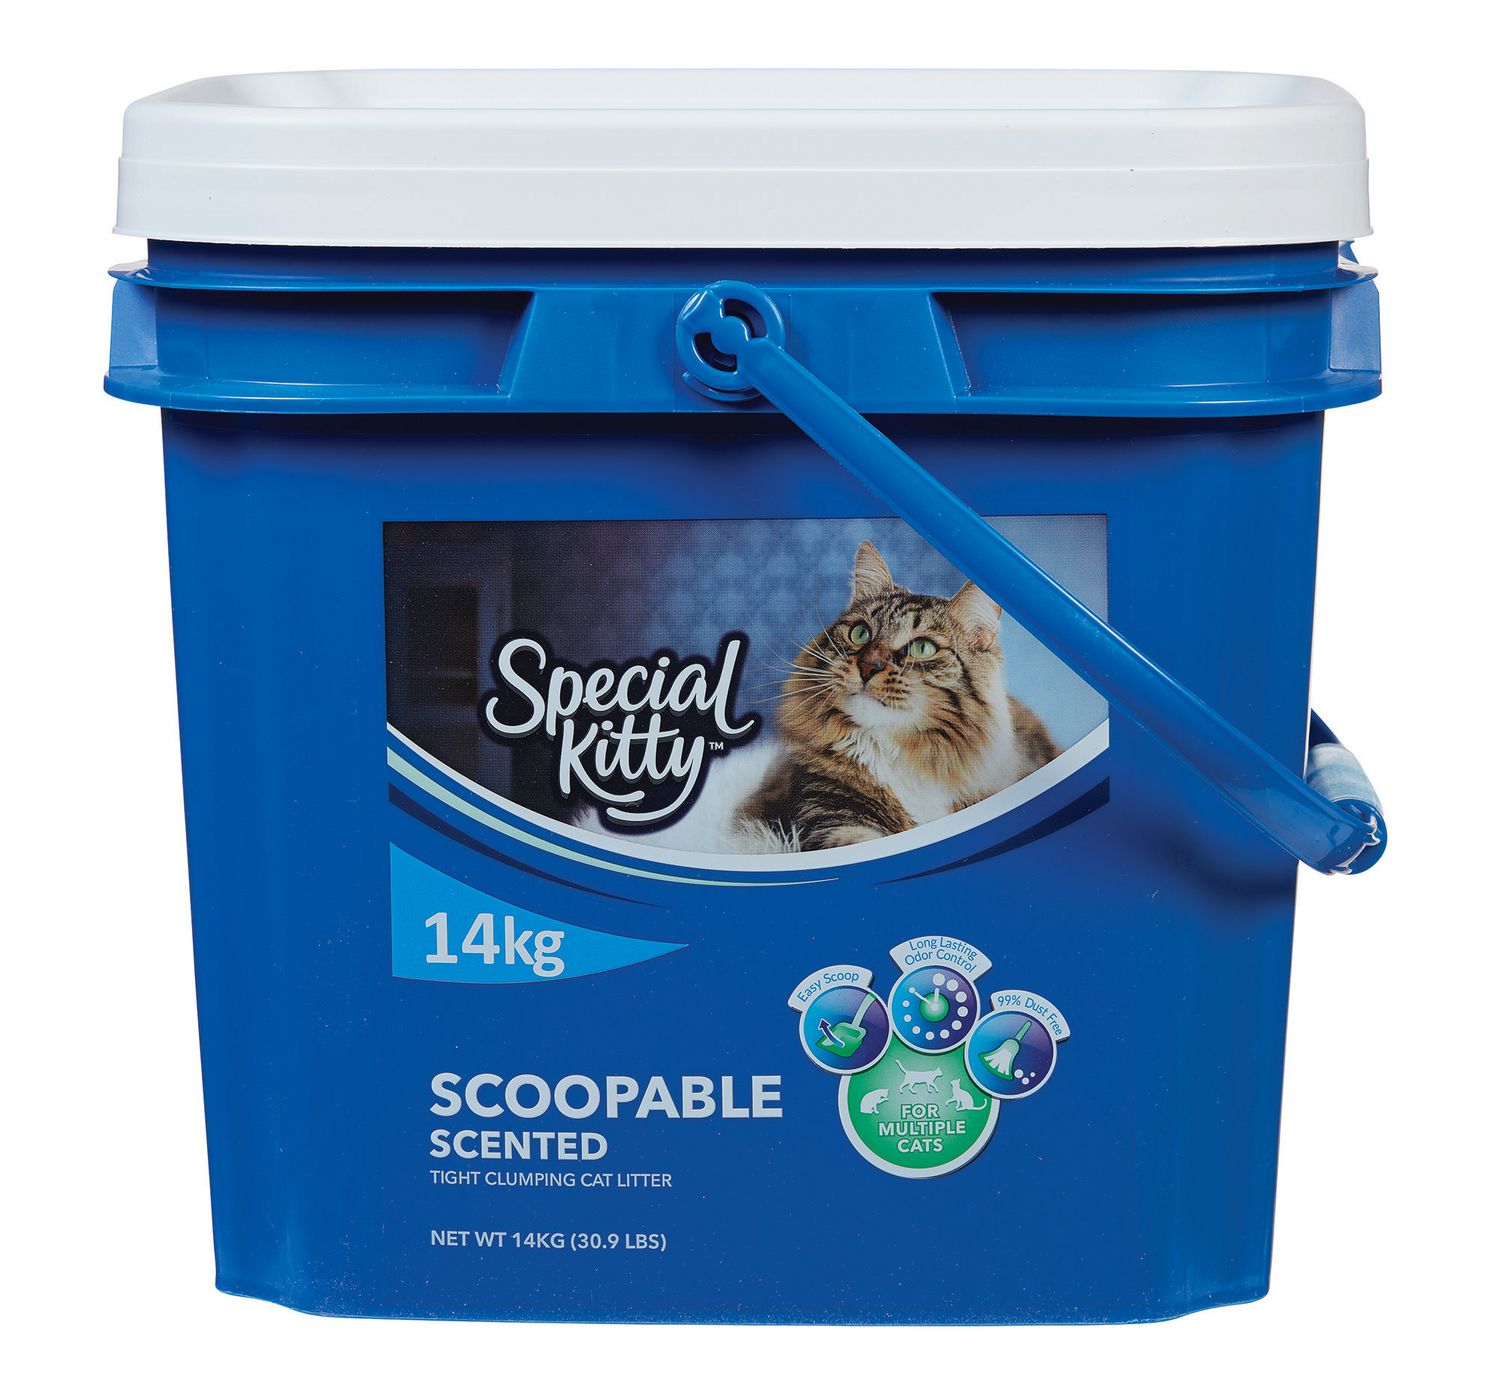 Special Kitty Scoopable Scented Tight Clumping CAT Litter Walmart Canada